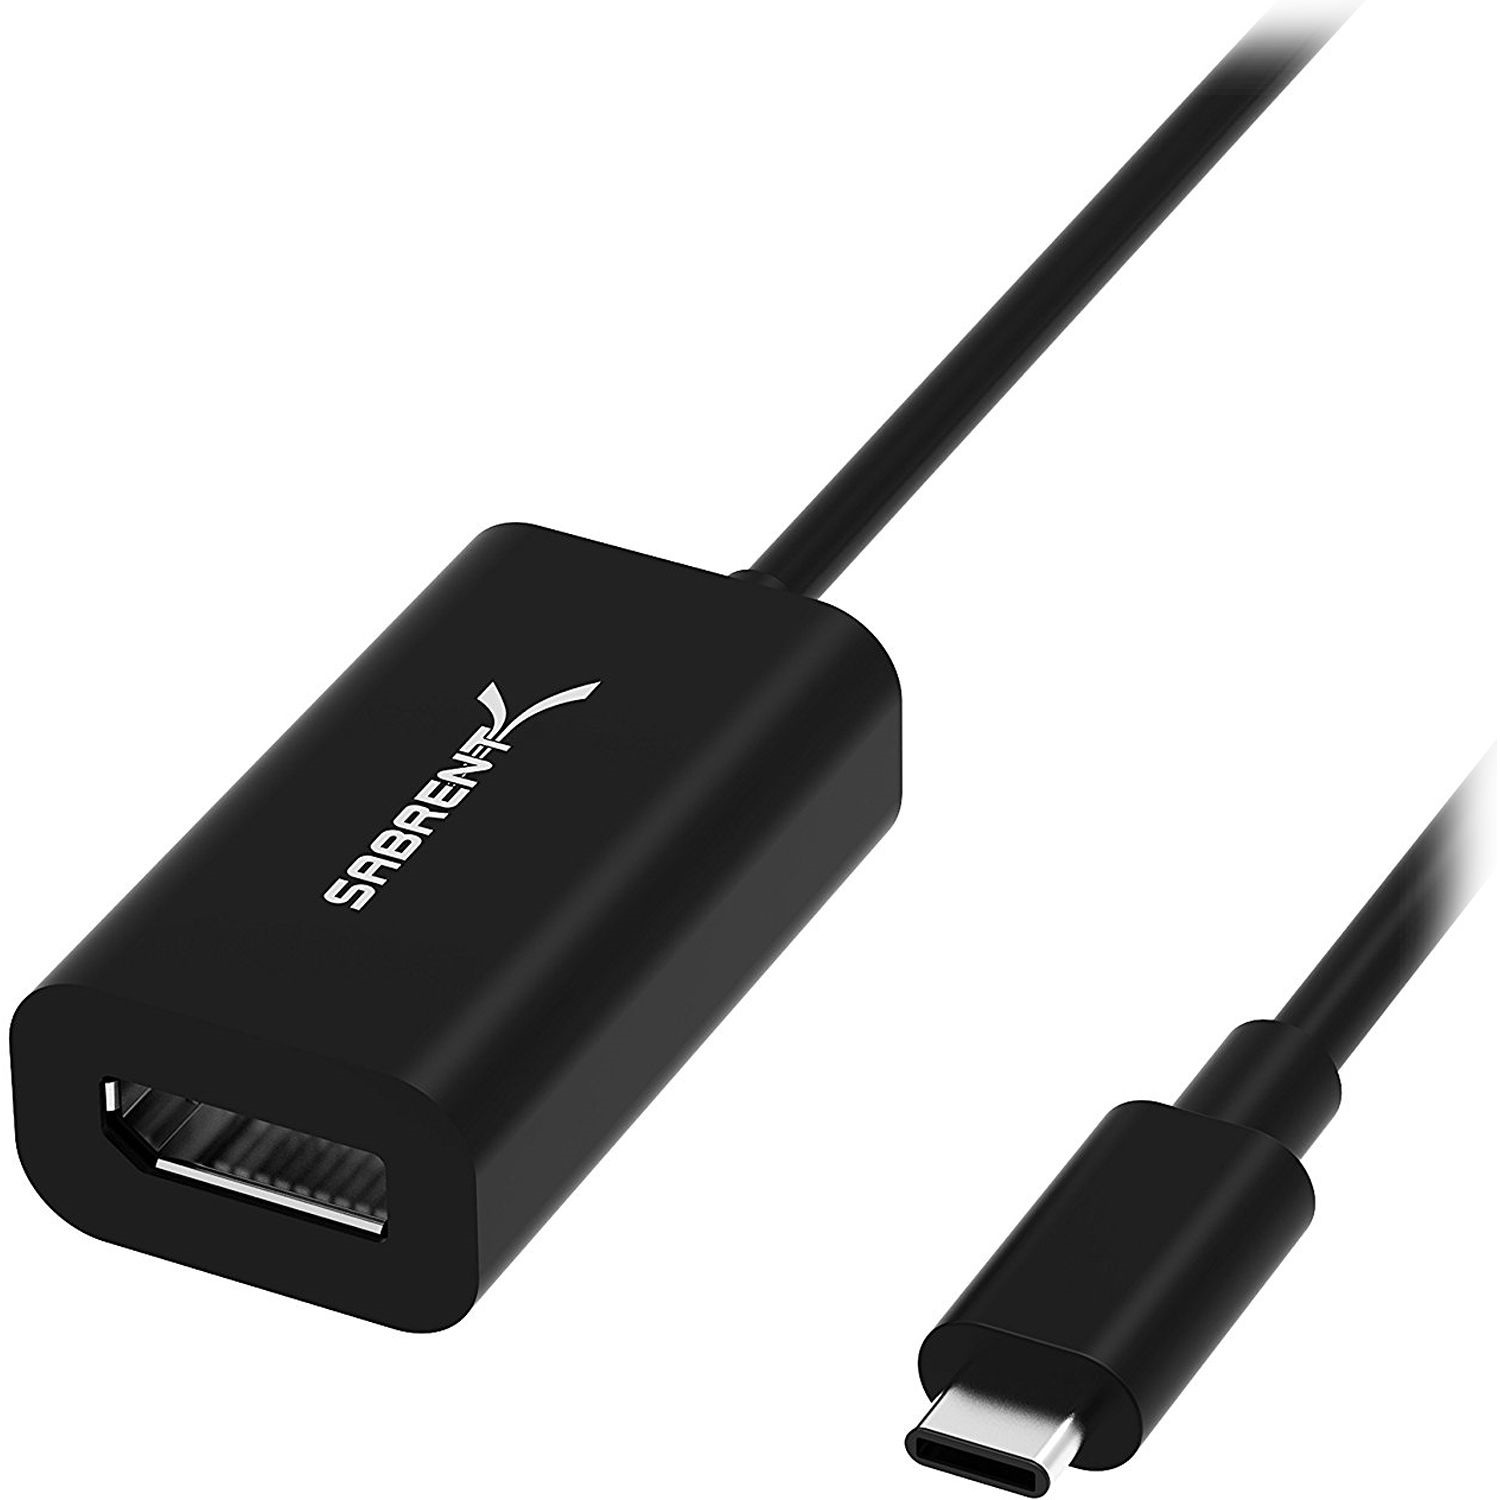 Sabrent USB 3.1 Type-C to DisplayPort Adapter with 4K Support